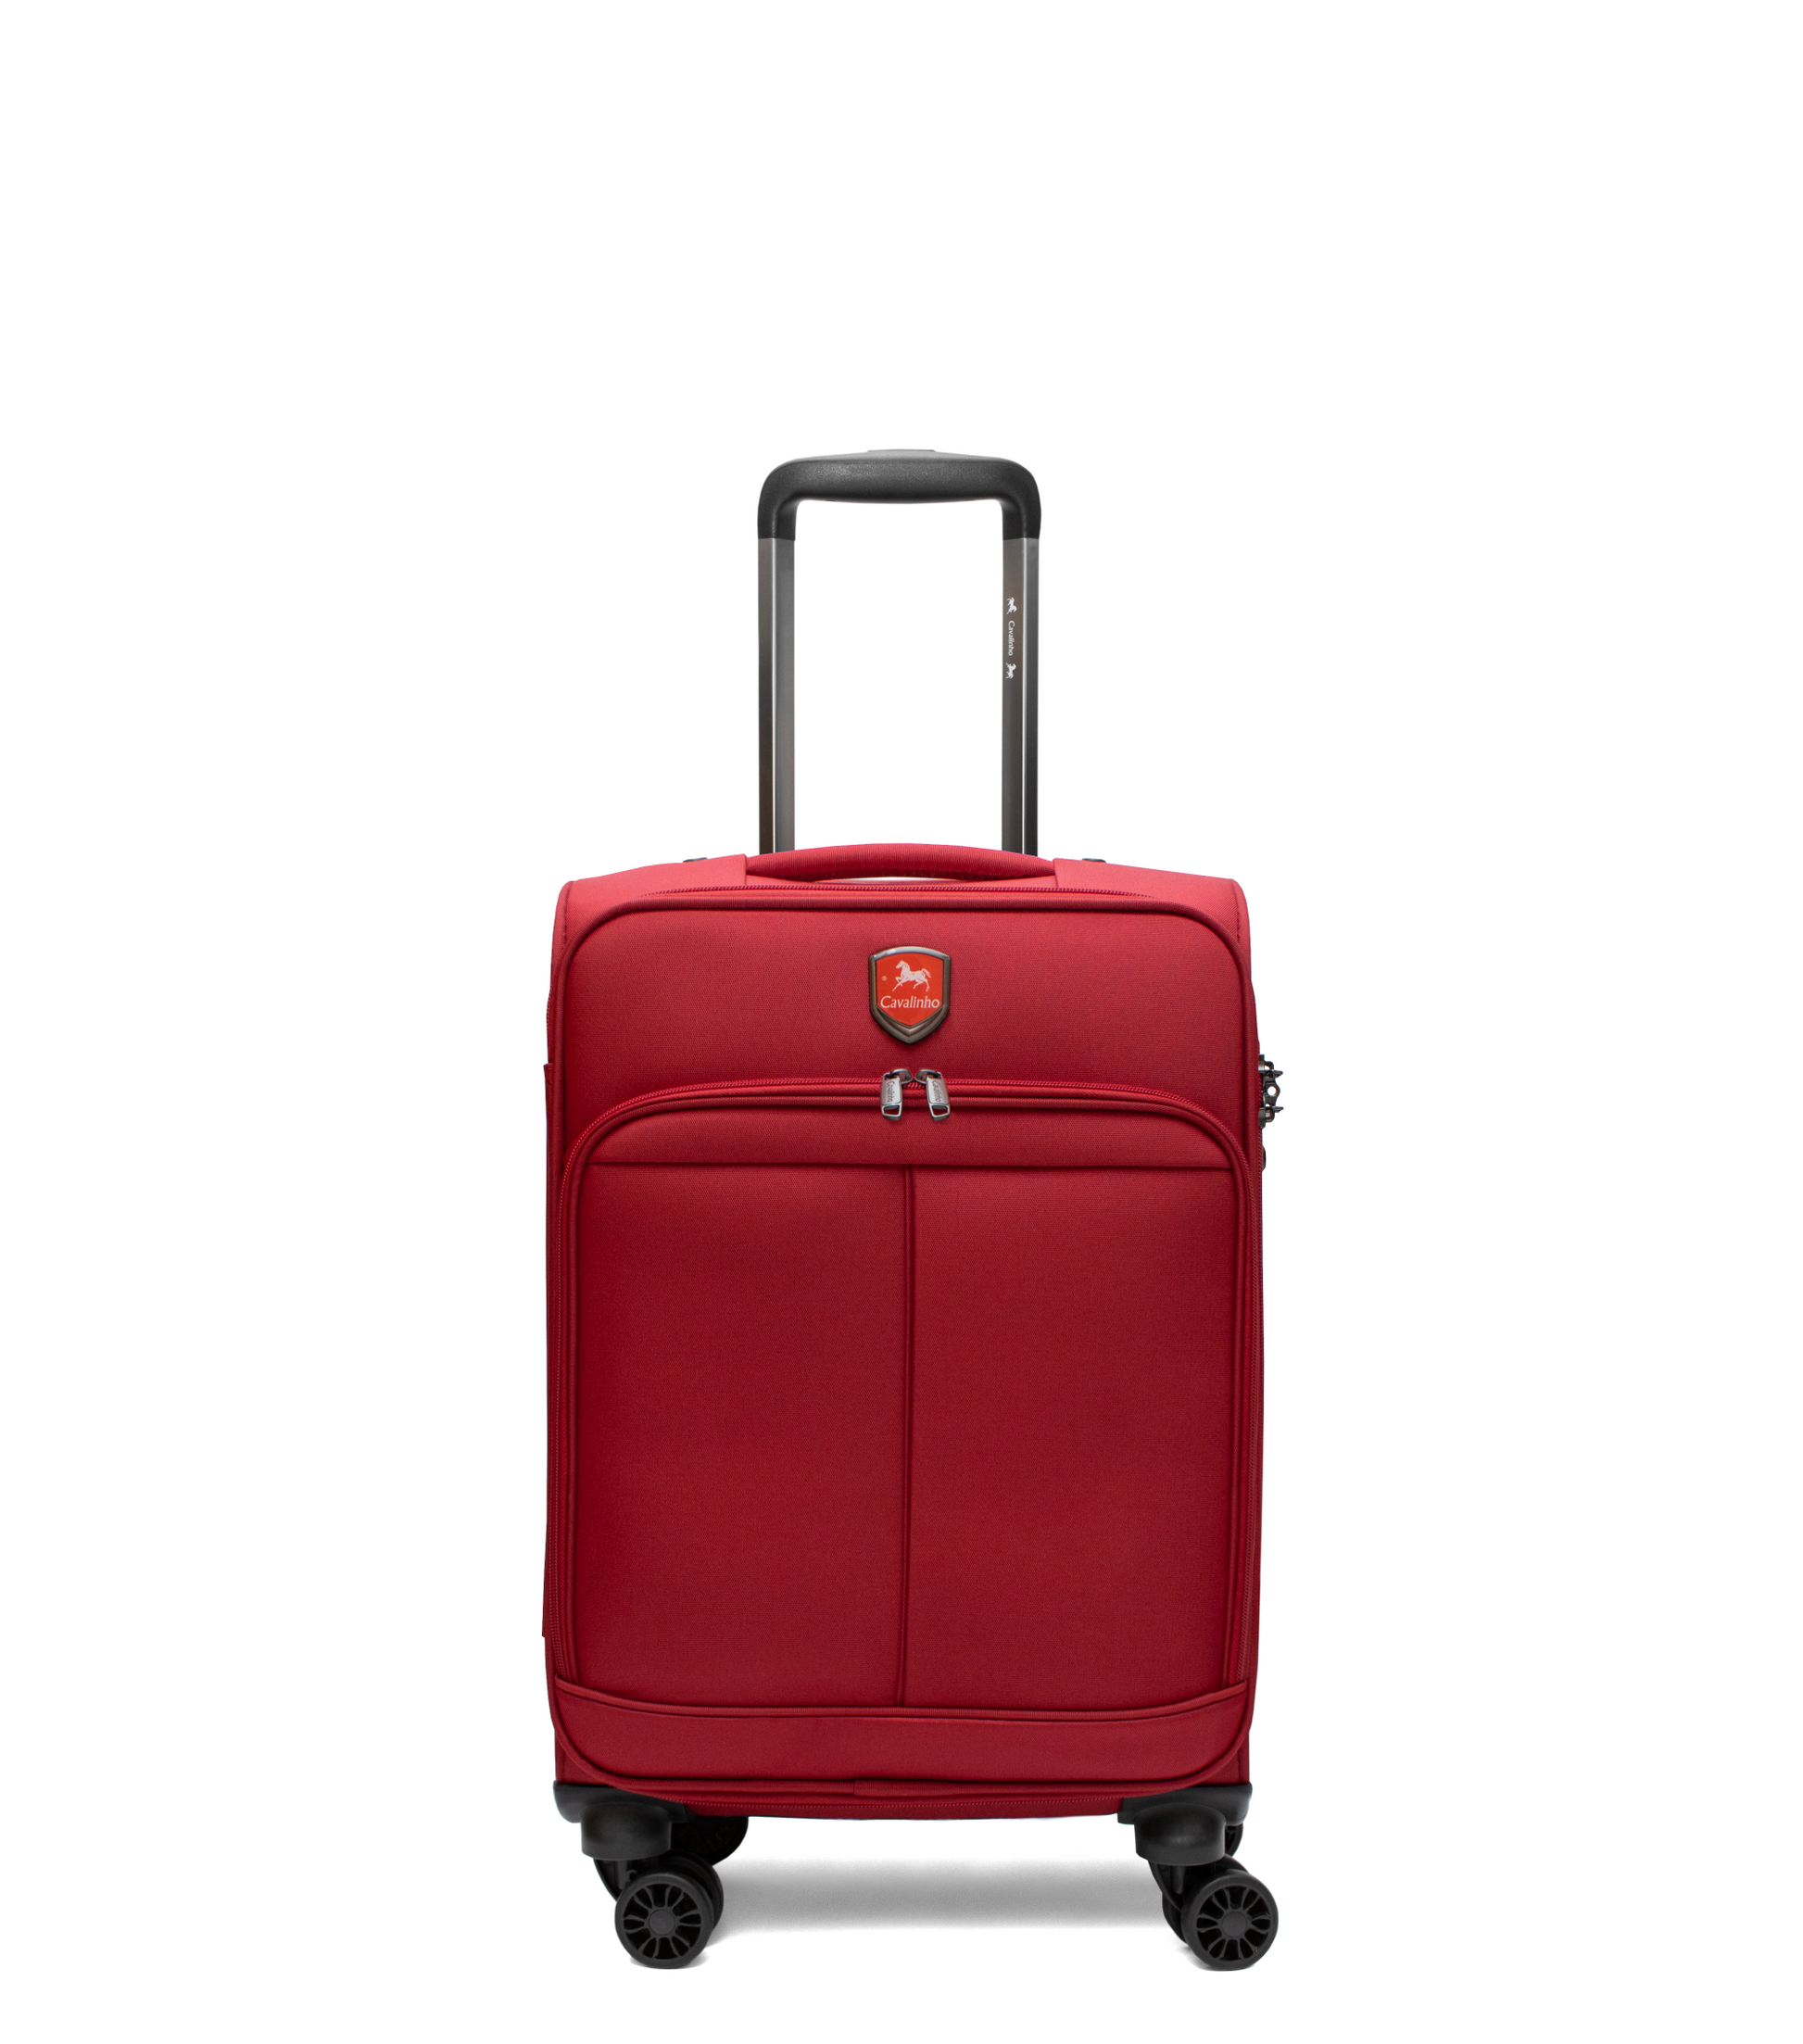 Cavalinho Carry-on Softside Cabin Luggage (16" or 19") - 19 inch Red - 68020003.04.19_1